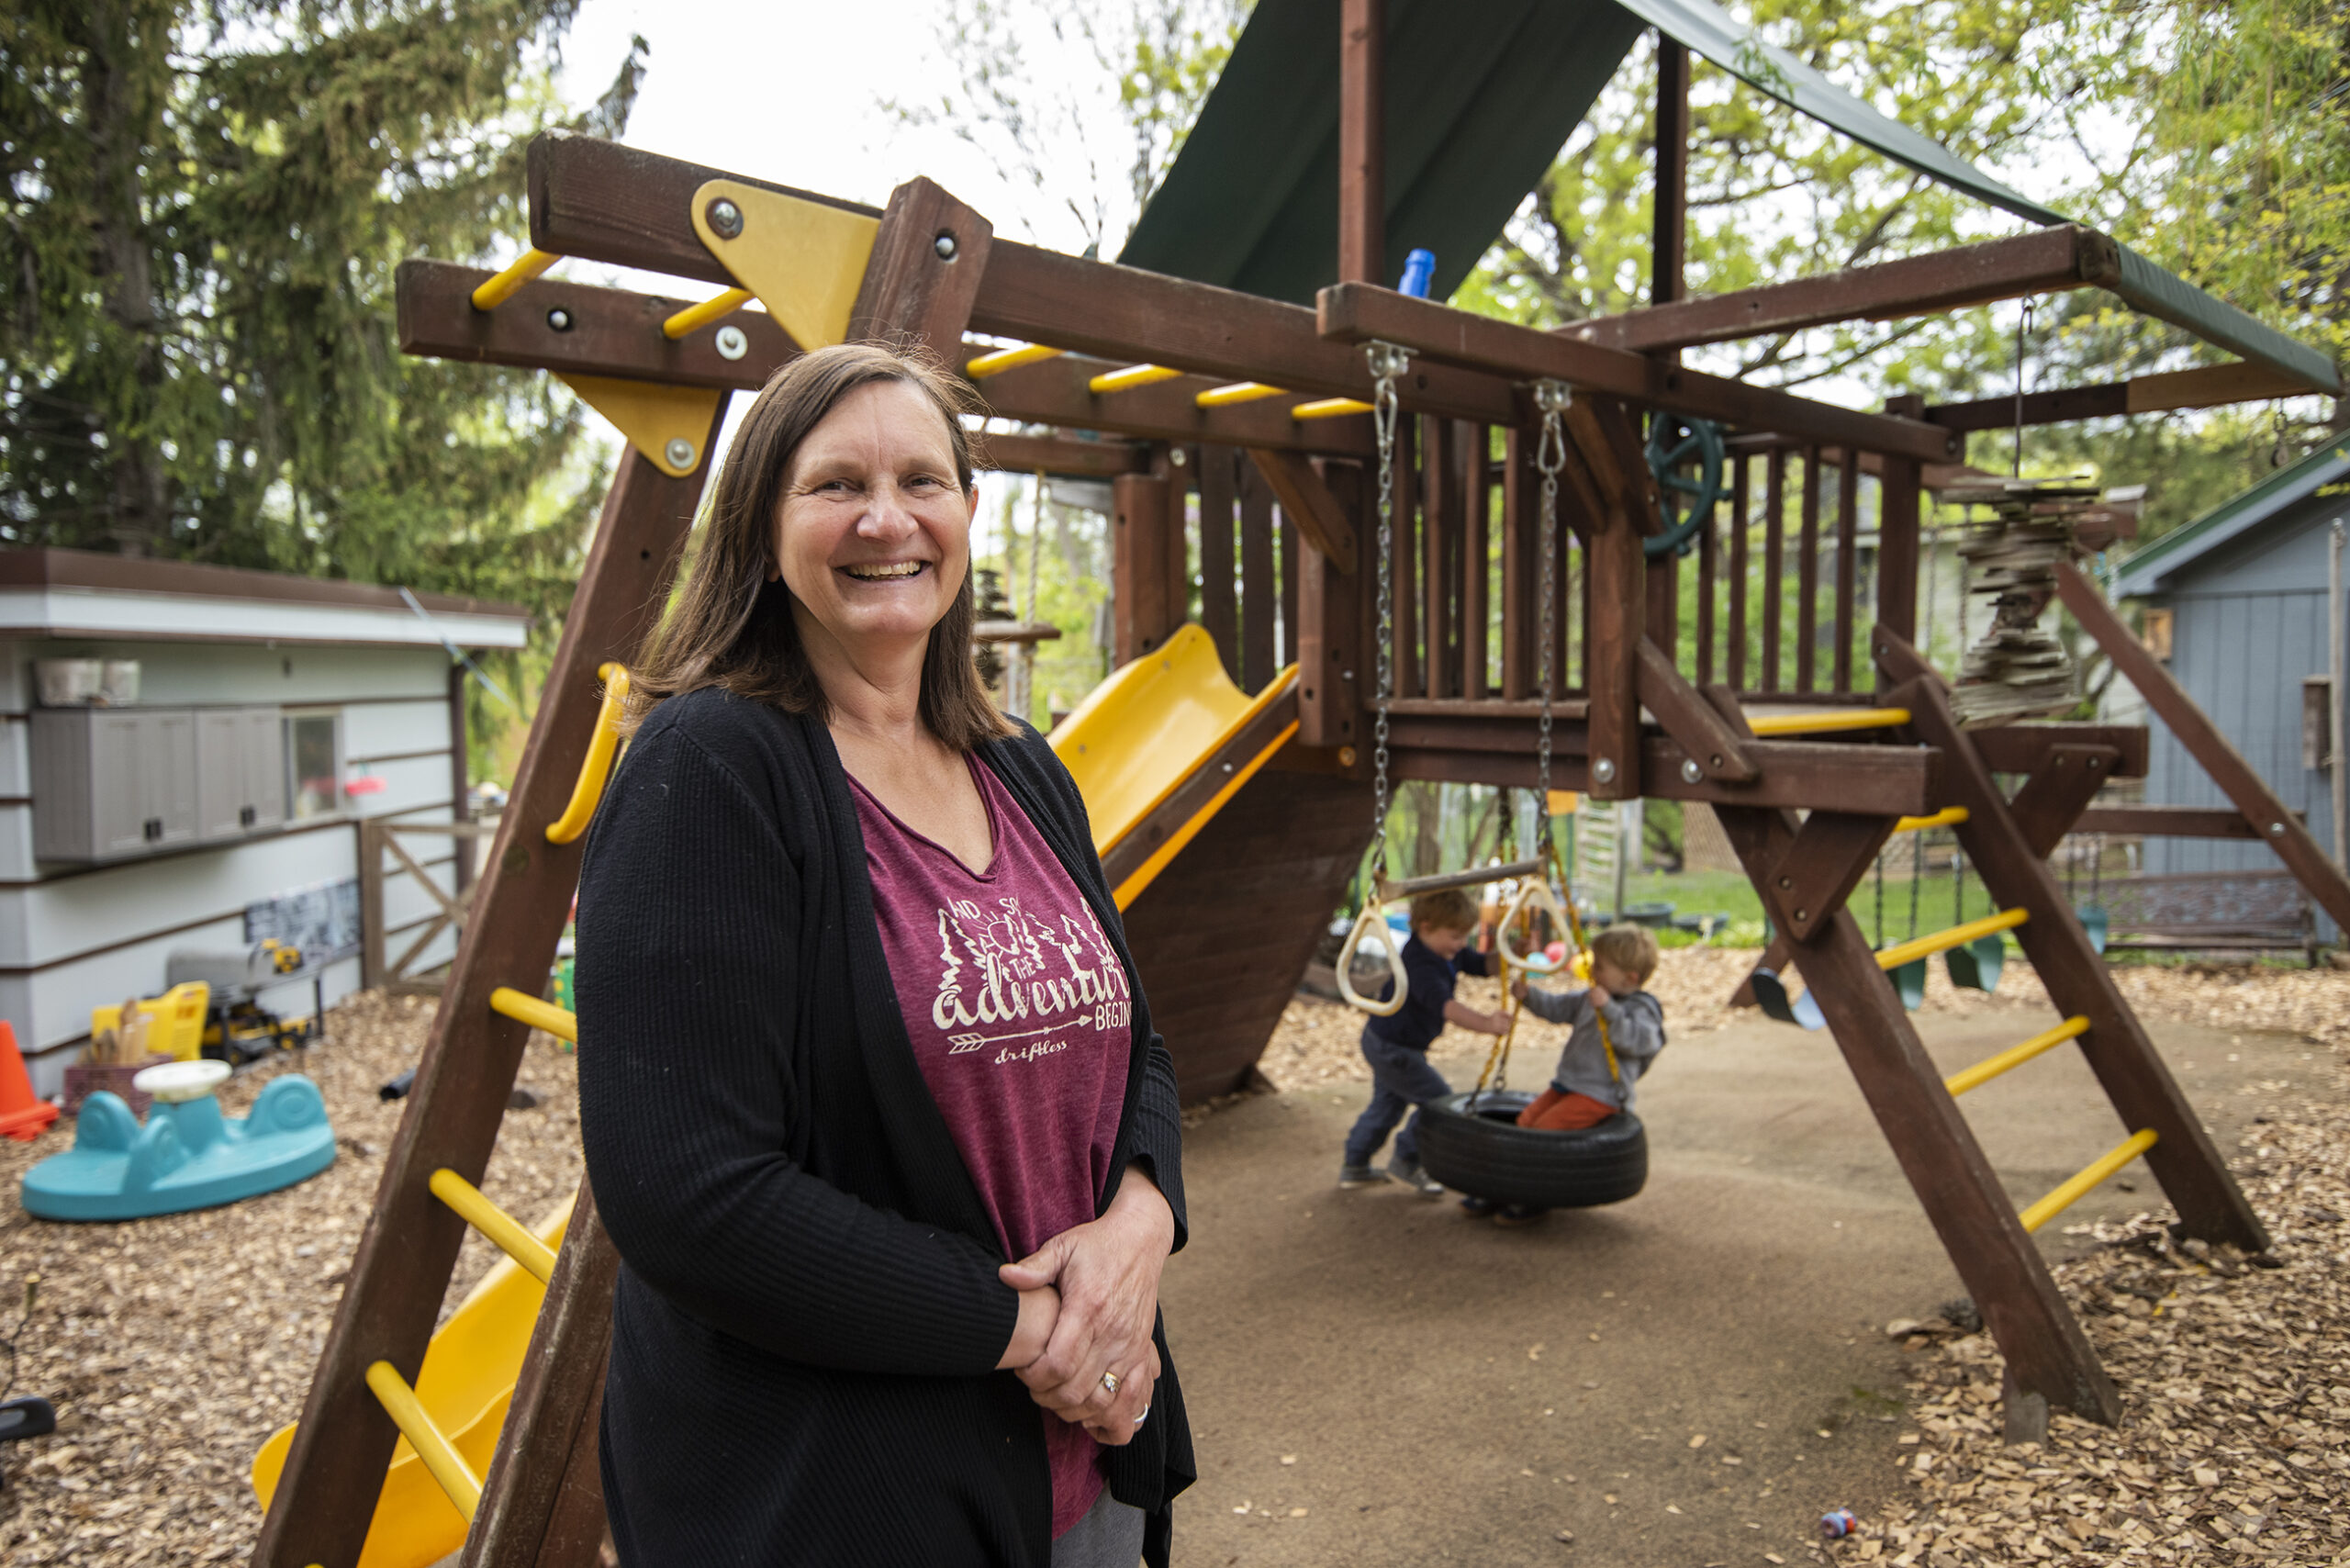 Sike O'Donnell stands in front of the playground as two children swing on a tire swing behind her.